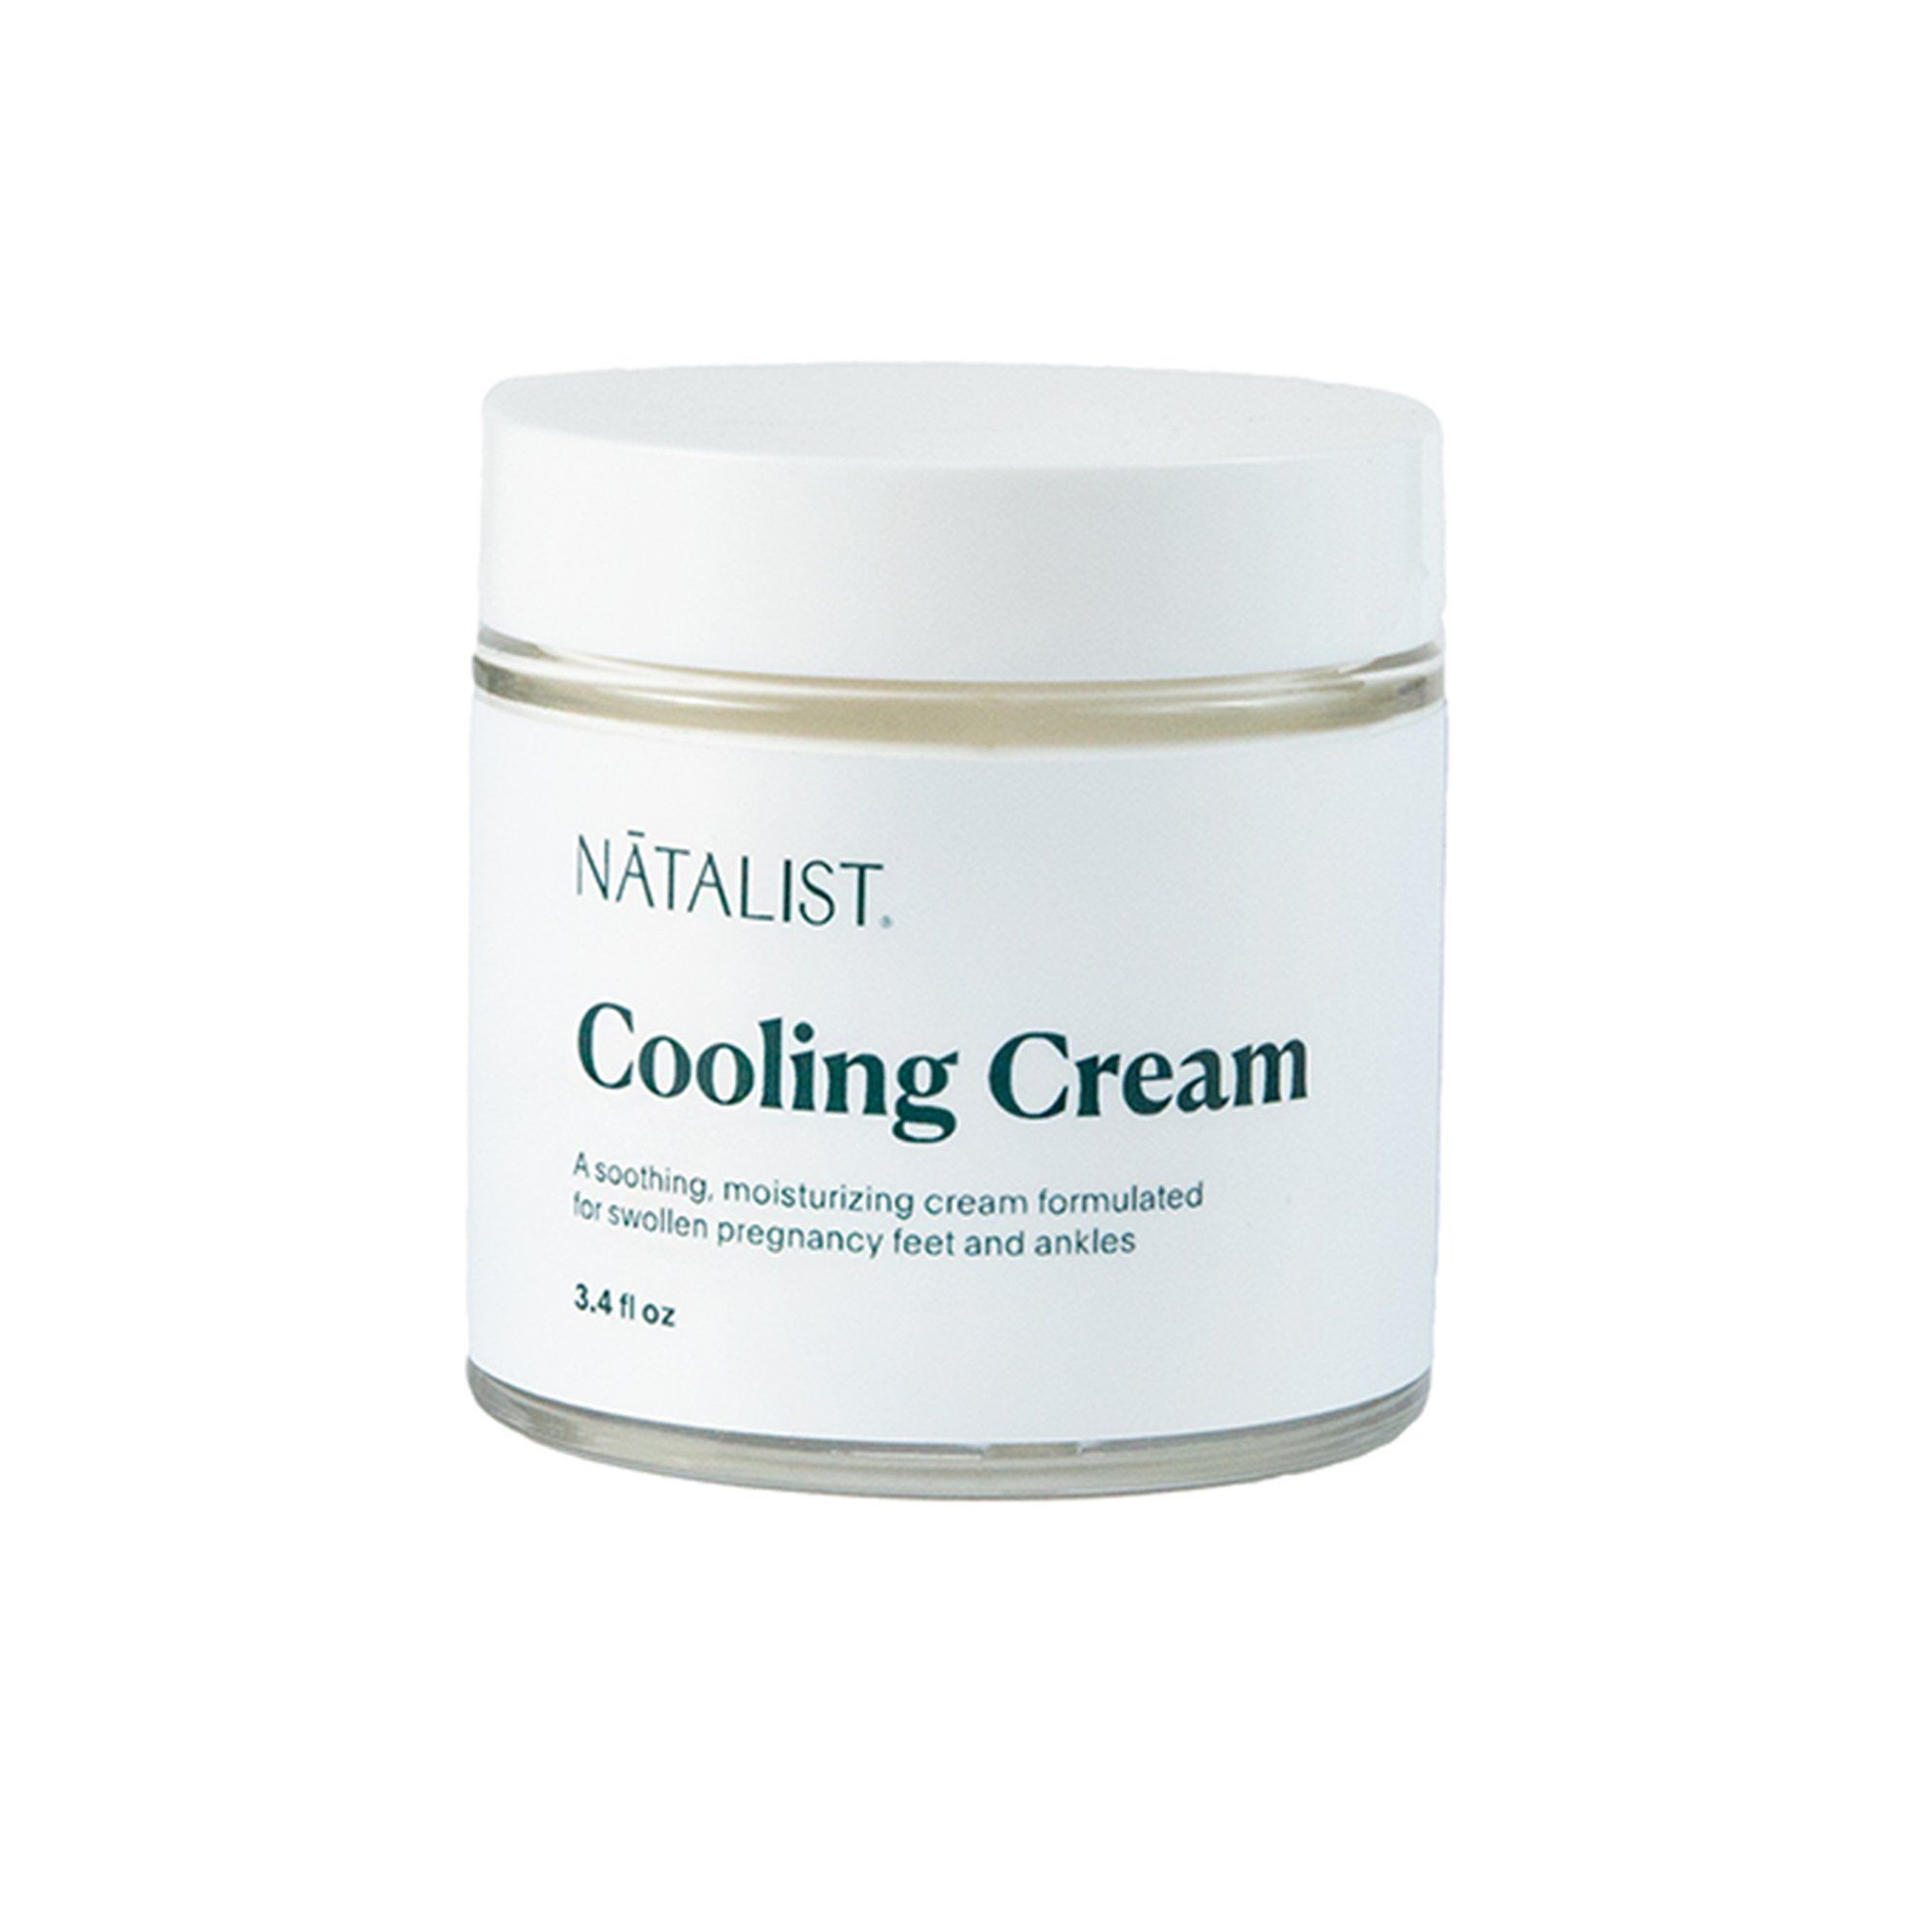 Natalist Cooling Foot Cream, Peppermint Scent - 3.4 oz